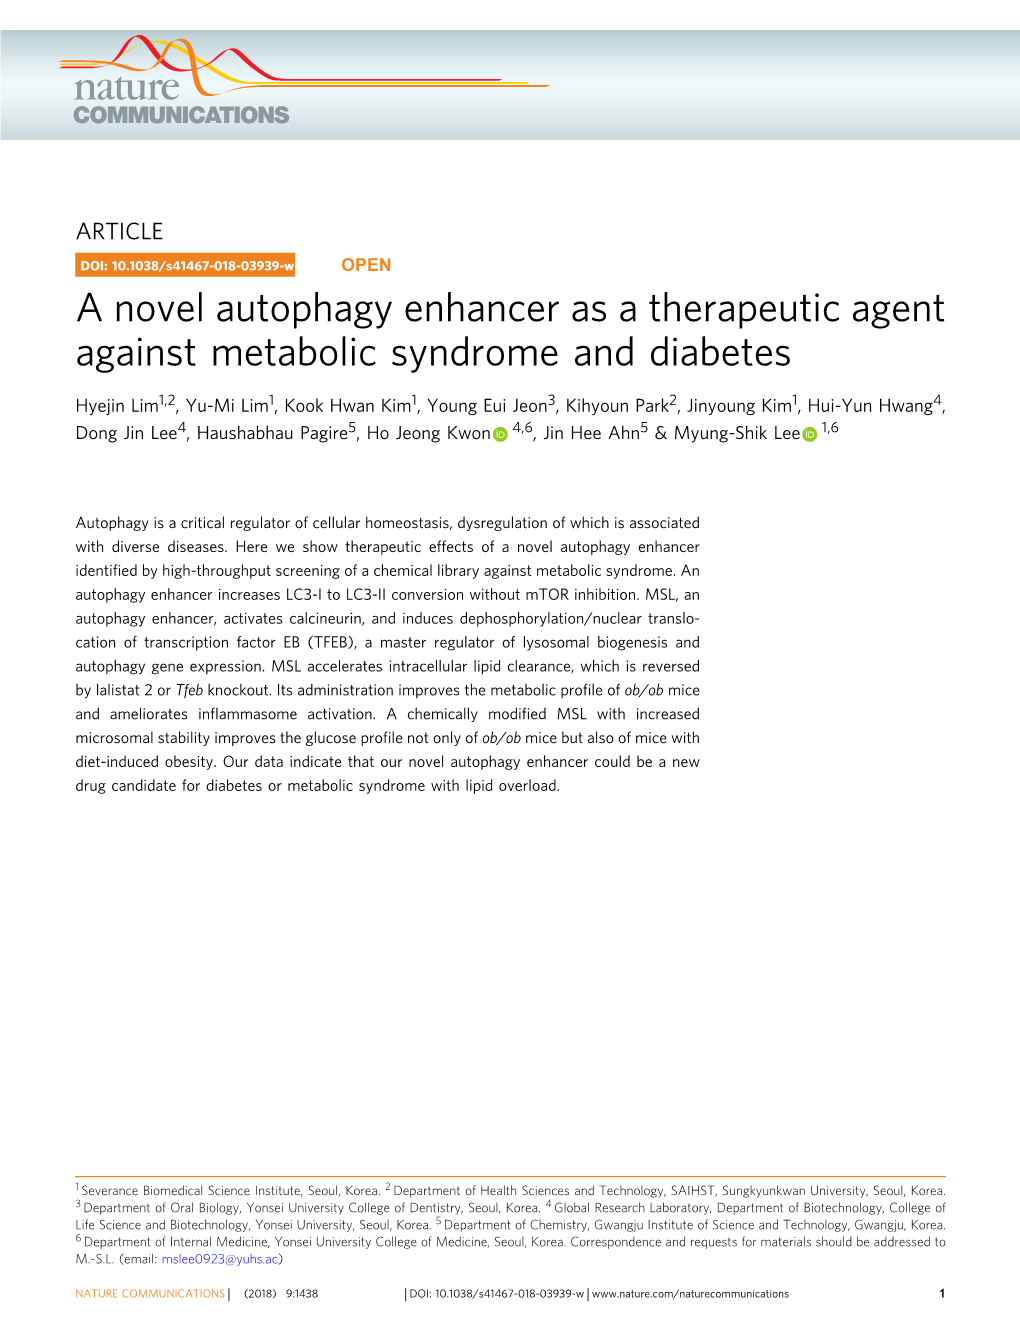 A Novel Autophagy Enhancer As a Therapeutic Agent Against Metabolic Syndrome and Diabetes